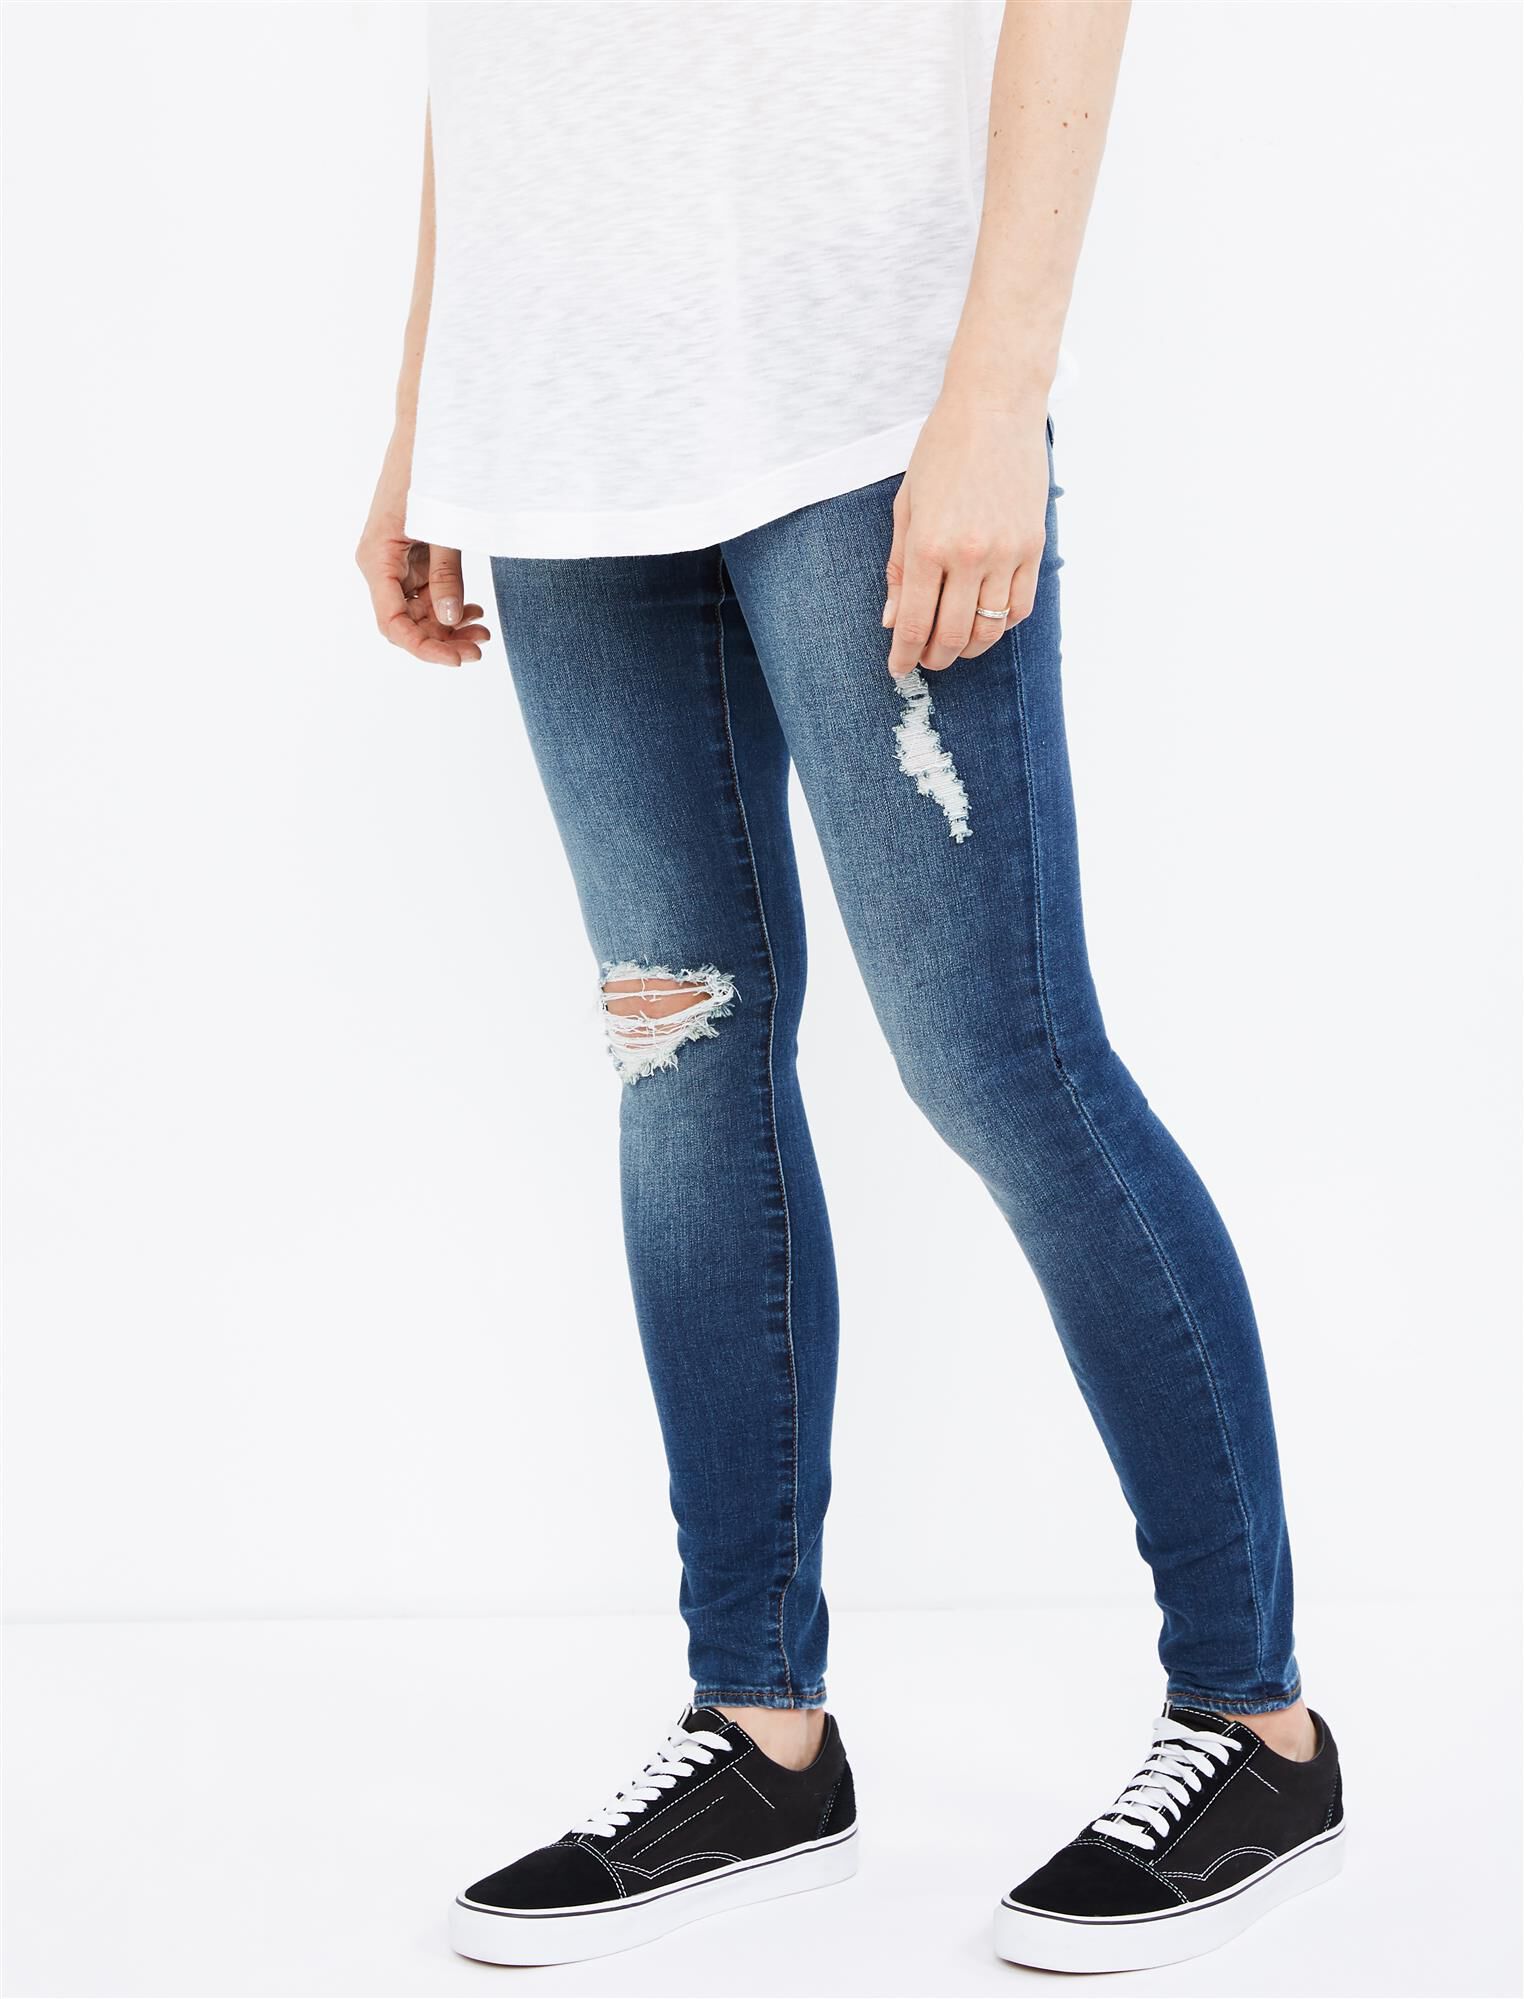 Articles Of Society Secret Fit Belly Sarah Maternity Jeans- Medium Wash | Destination Maternity